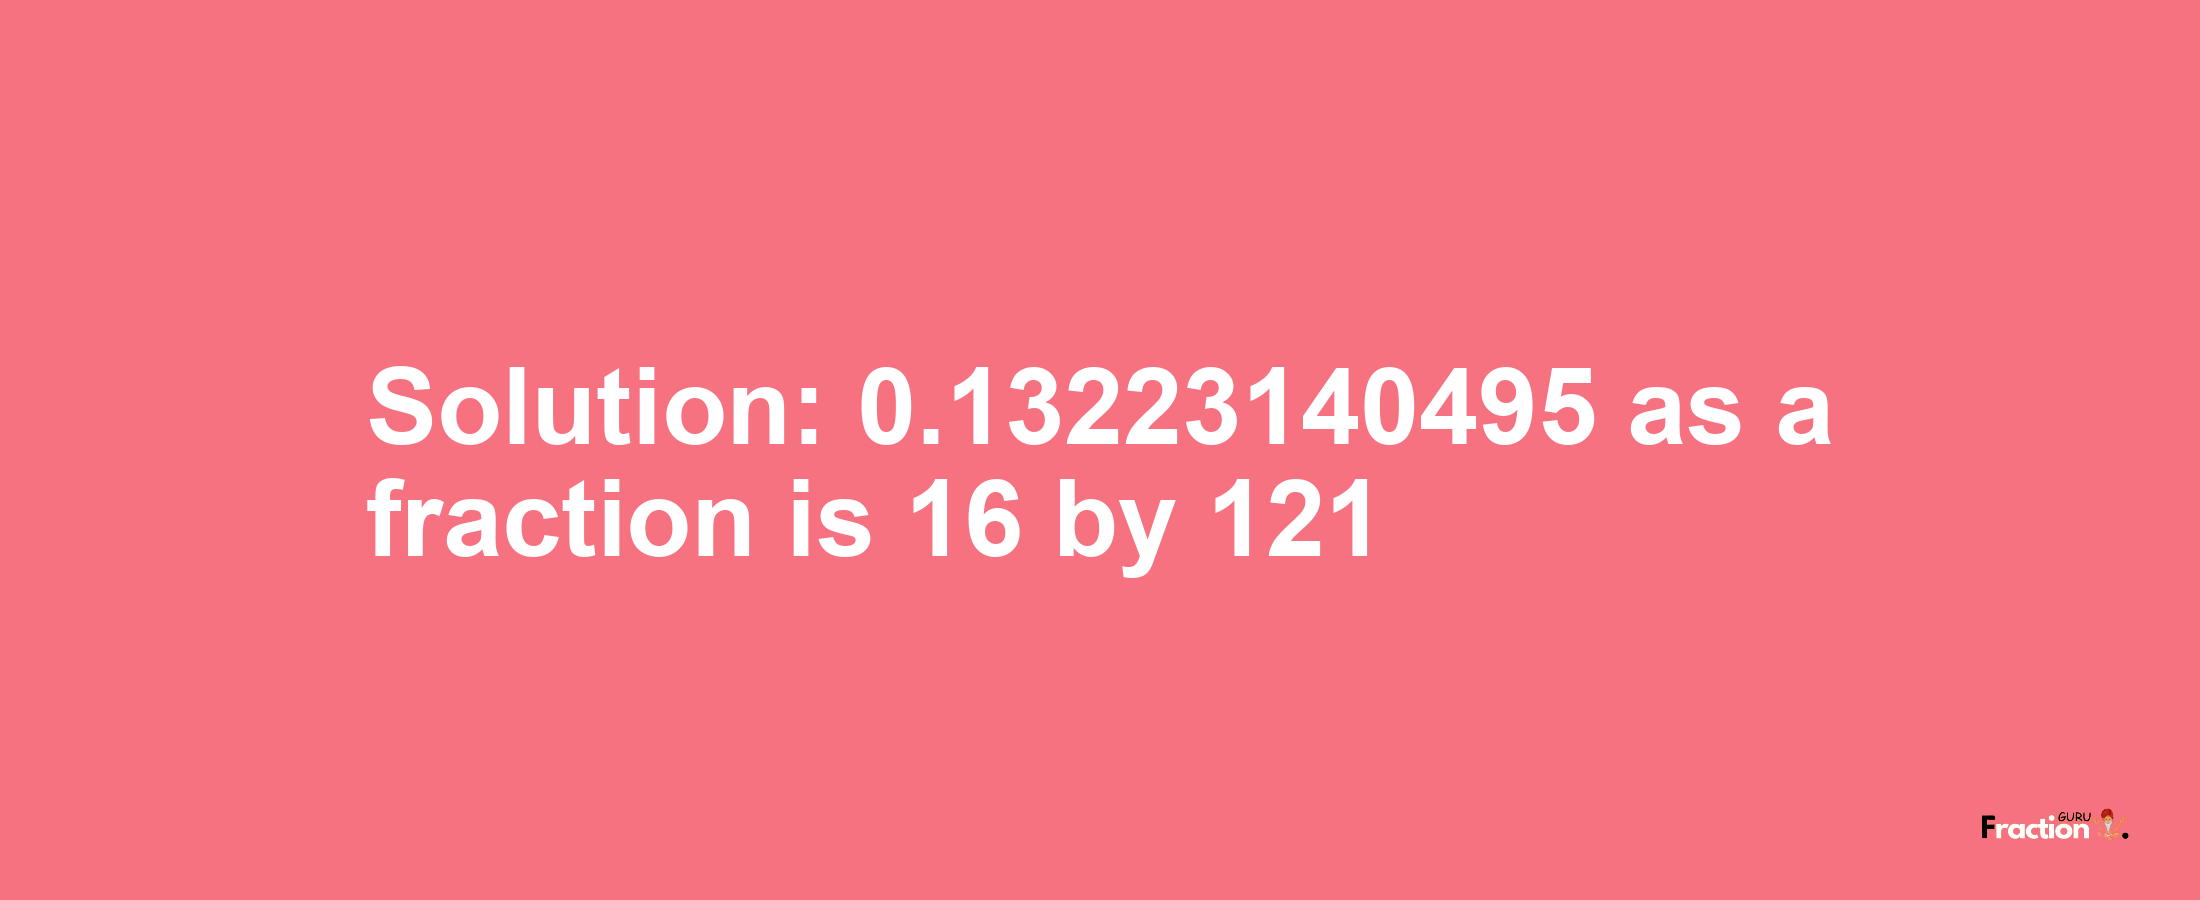 Solution:0.13223140495 as a fraction is 16/121